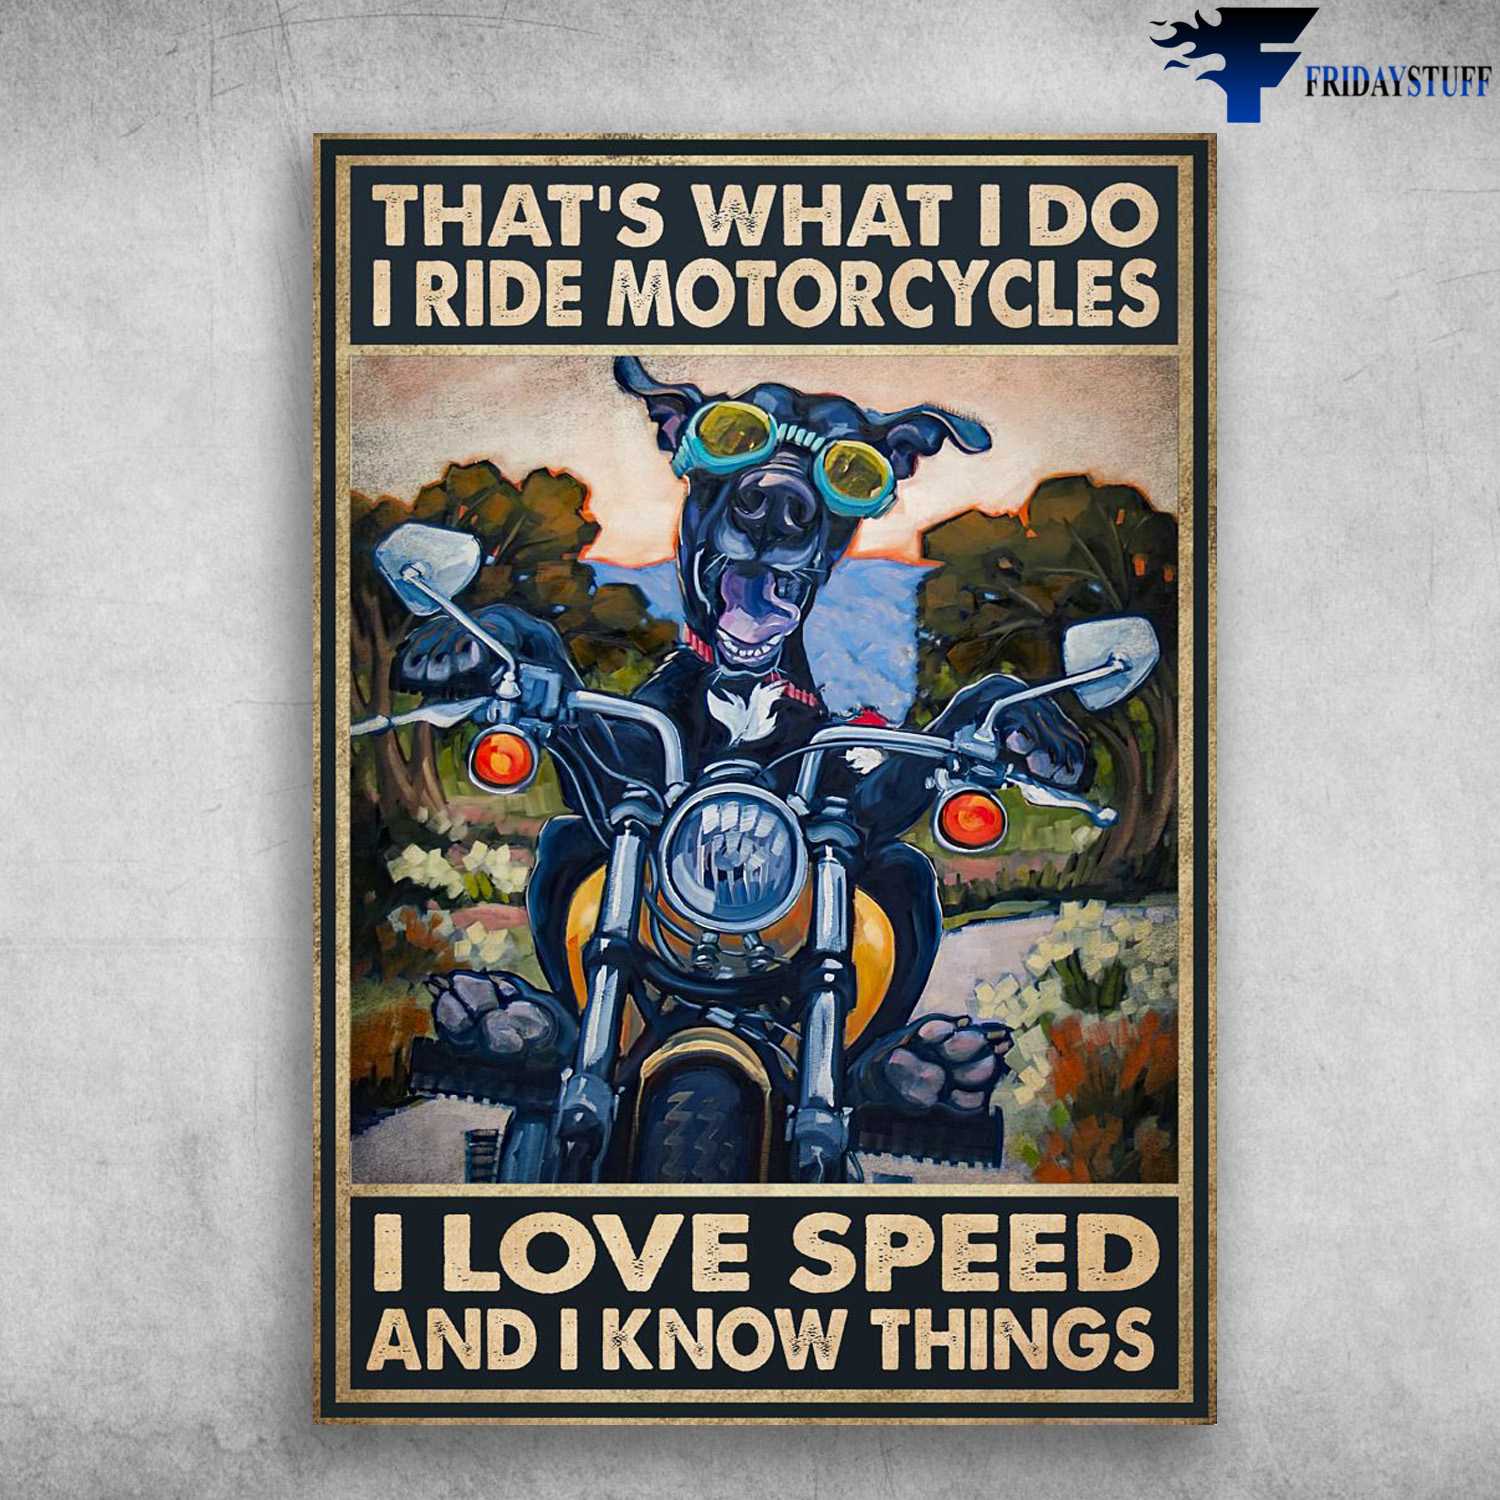 Dog Biker, Motorcycle Riding, That;s What I Do, I Ride Motorcycles, I Love Speed, And I Know Things